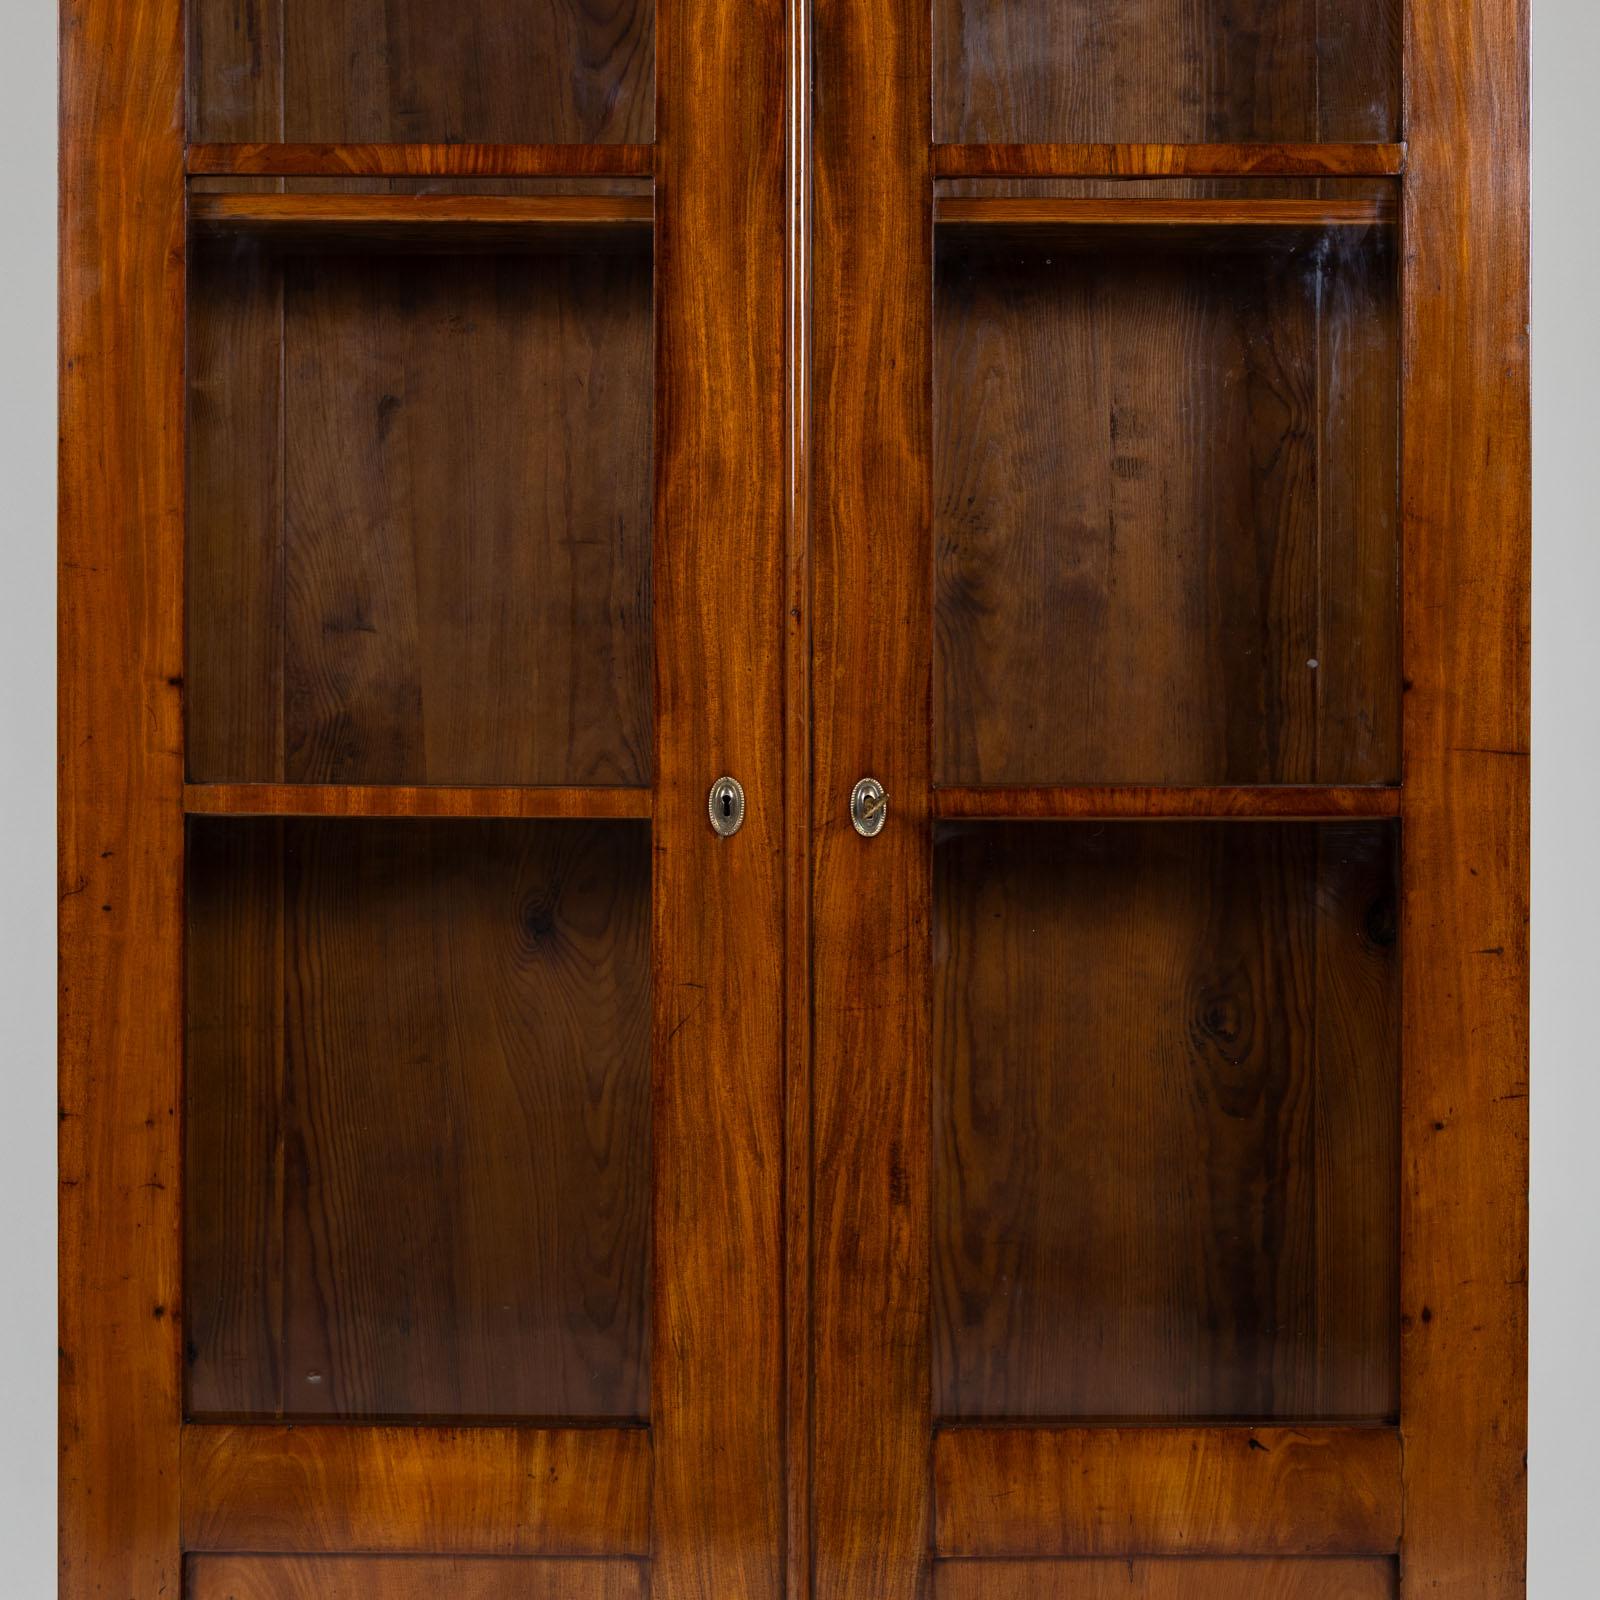 Biedermeier bookcase with two doors with three-quarter glazing and a flat profiled cornice. The cabinet stands on square feet and is veneered in mahogany. The interior is fitted with four adjustable shelves. The bookcase has been restored and